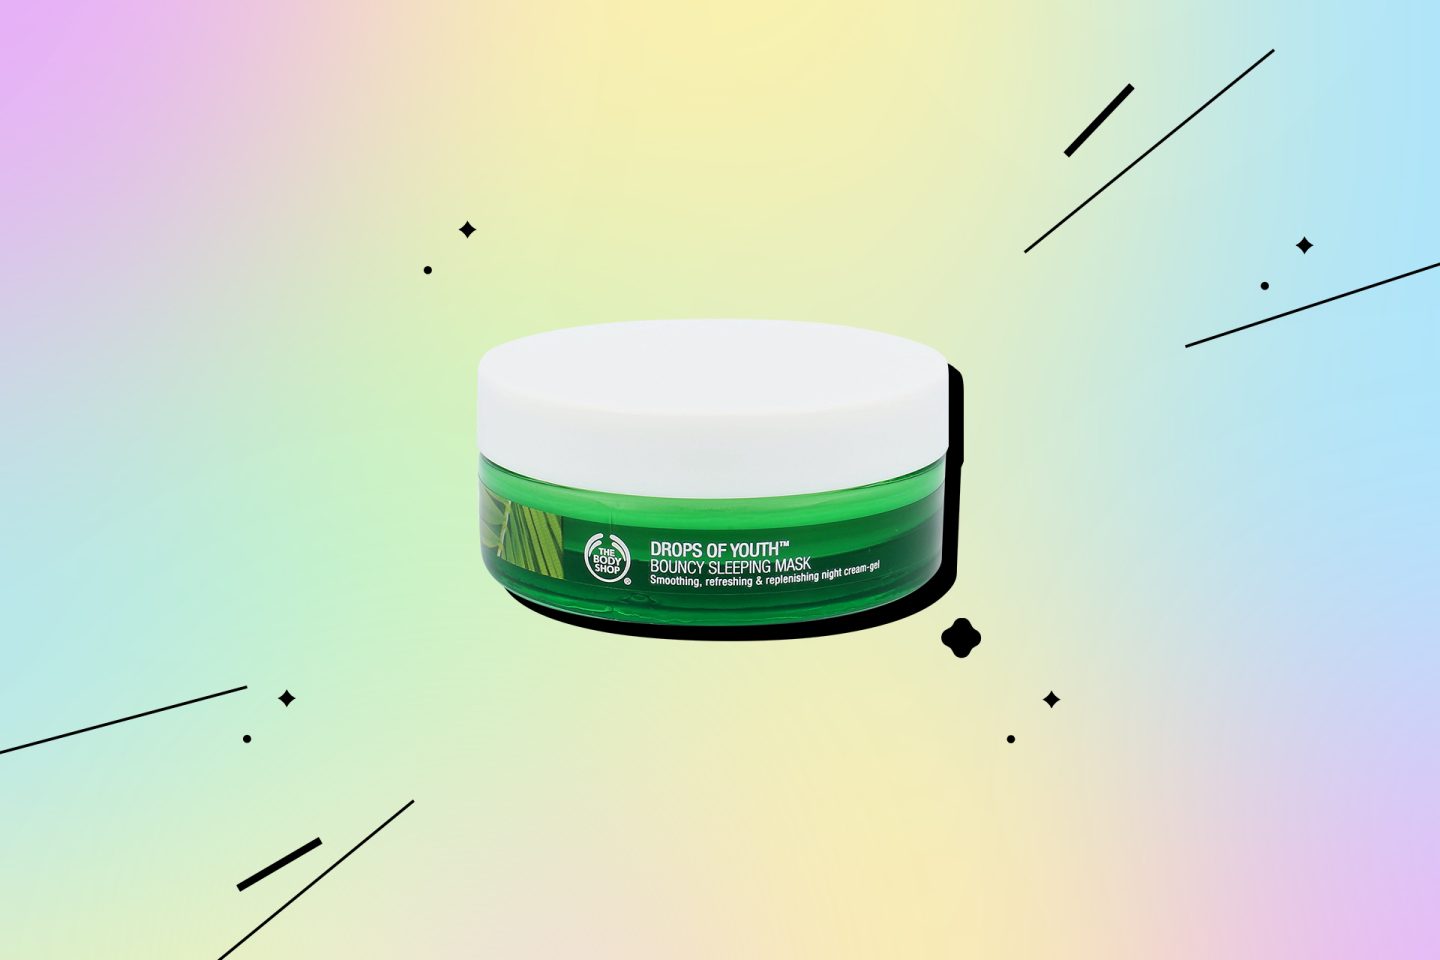 The Body Shop Drops of Youth Sleep Mask